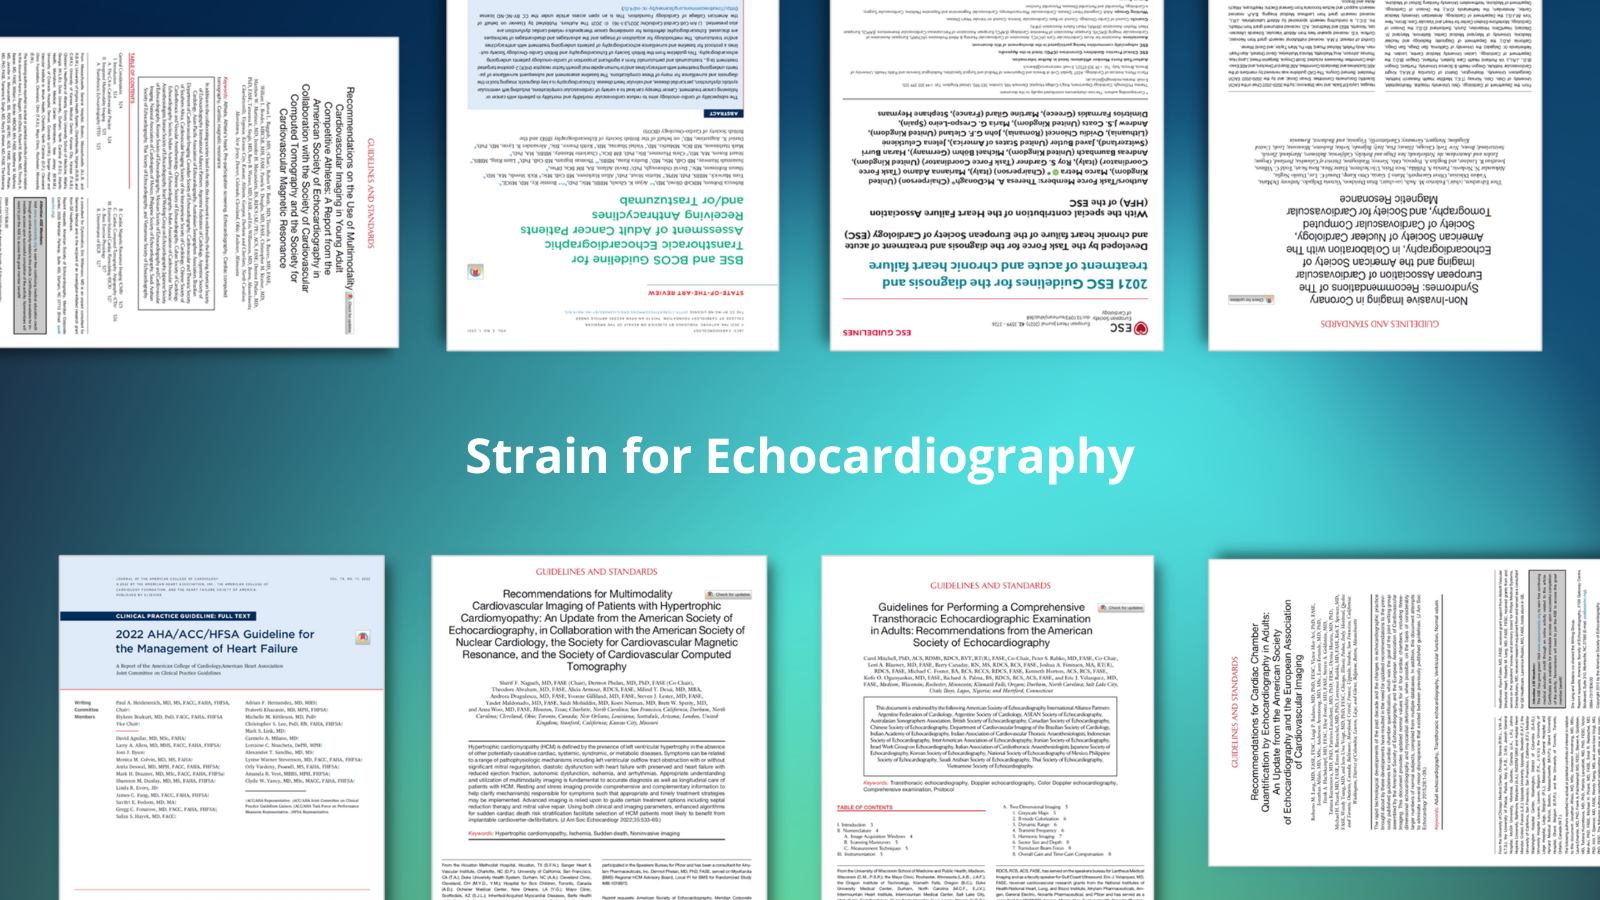 Clinical Applications of Echo Strain Imaging: a Current Appraisal